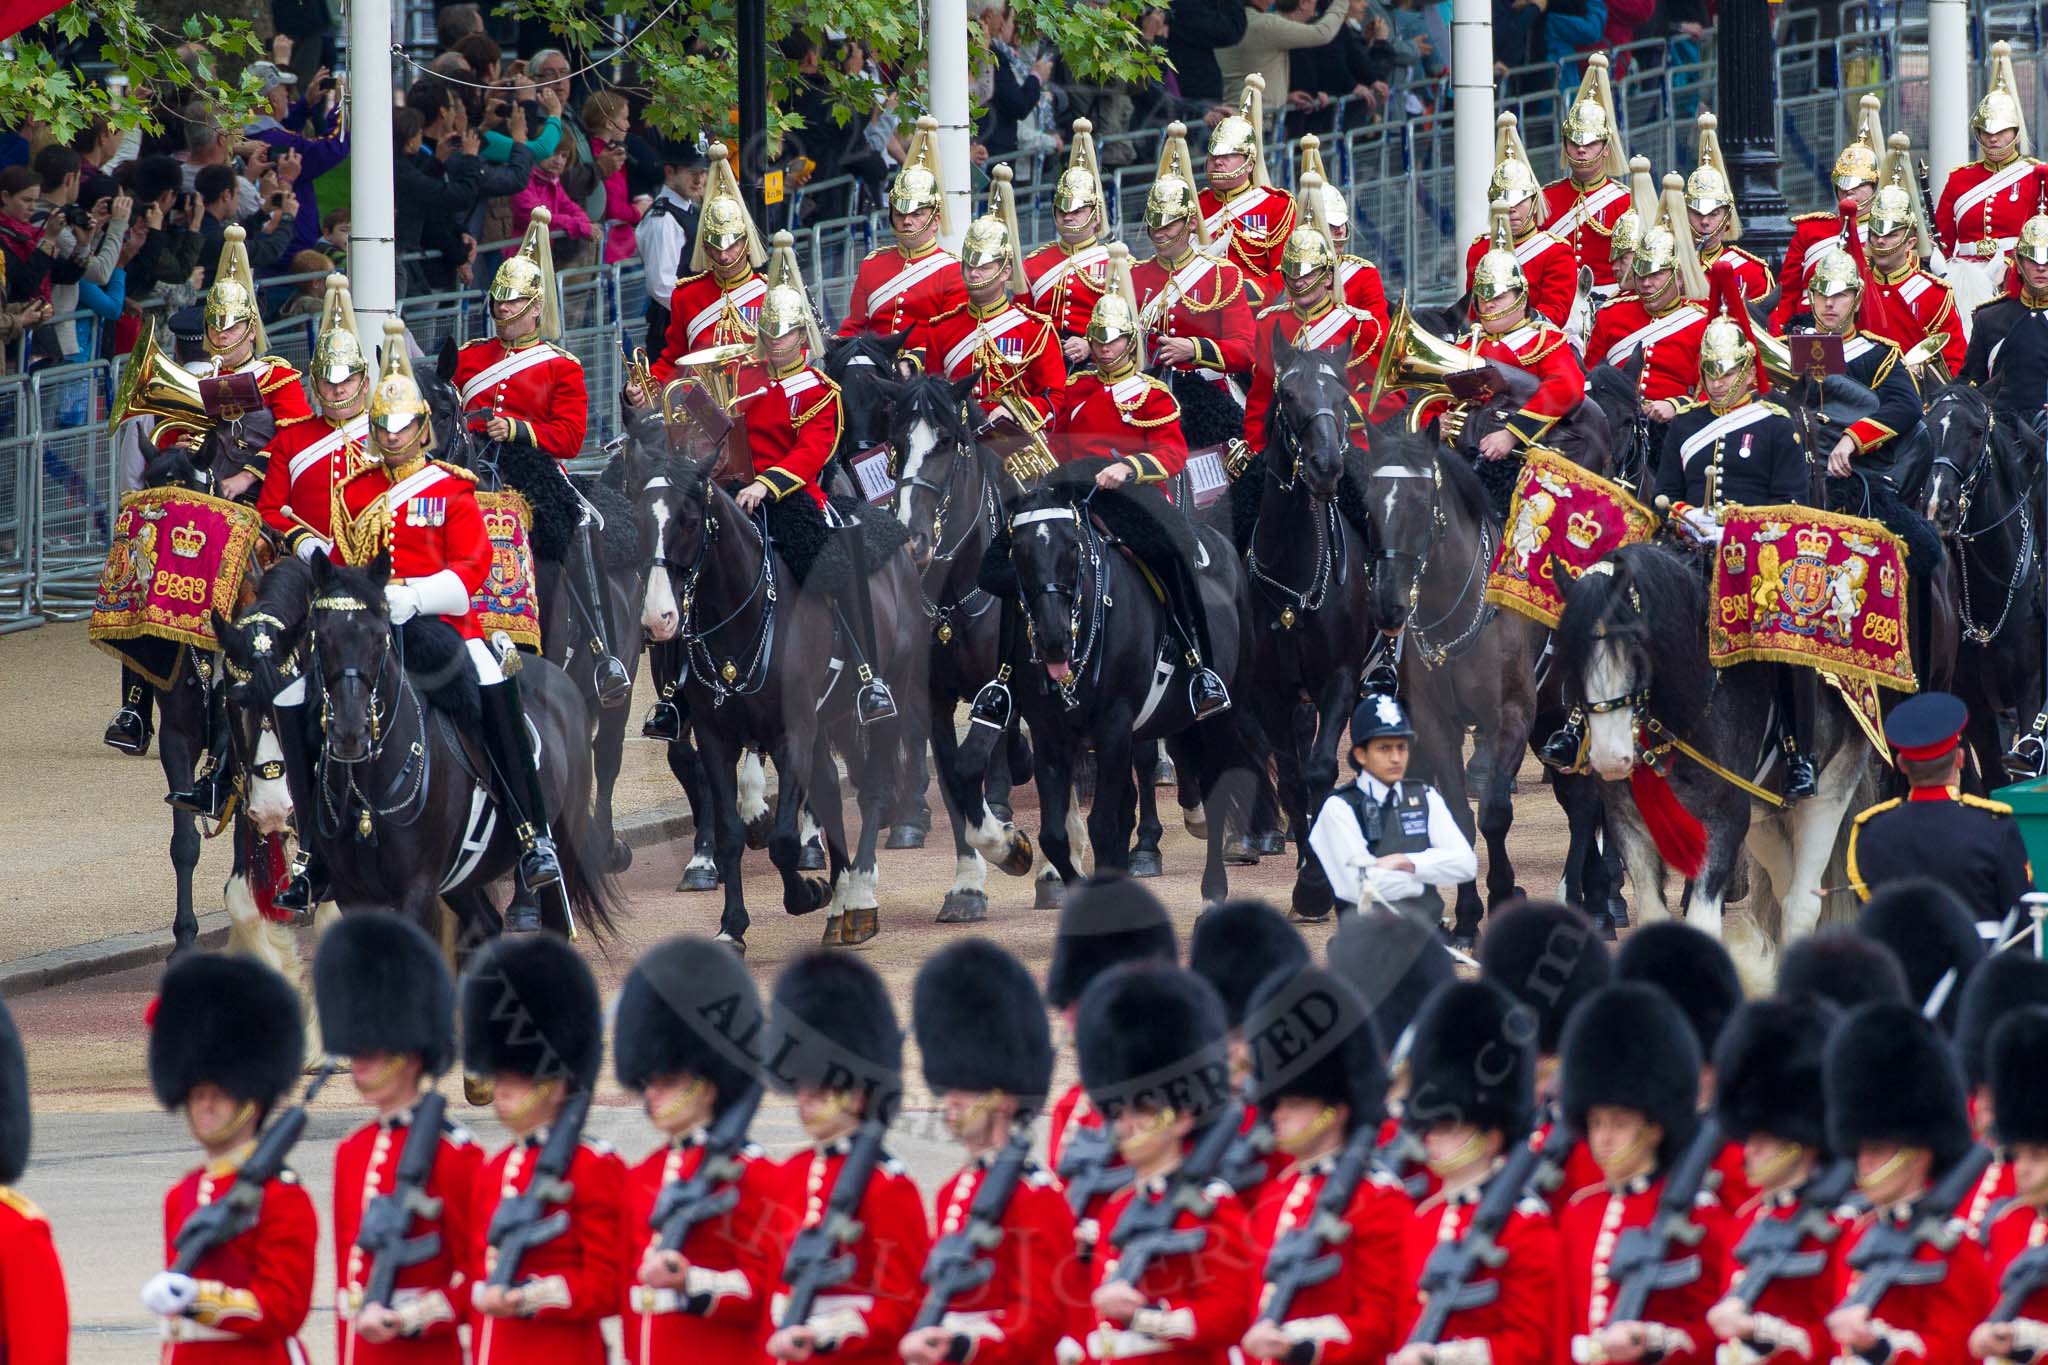 Major General's Review 2013: The Mounted Bands of the Household Cavalry are marching down Horse Guards Road as the third element of the Royal Procession..
Horse Guards Parade, Westminster,
London SW1,

United Kingdom,
on 01 June 2013 at 10:56, image #227